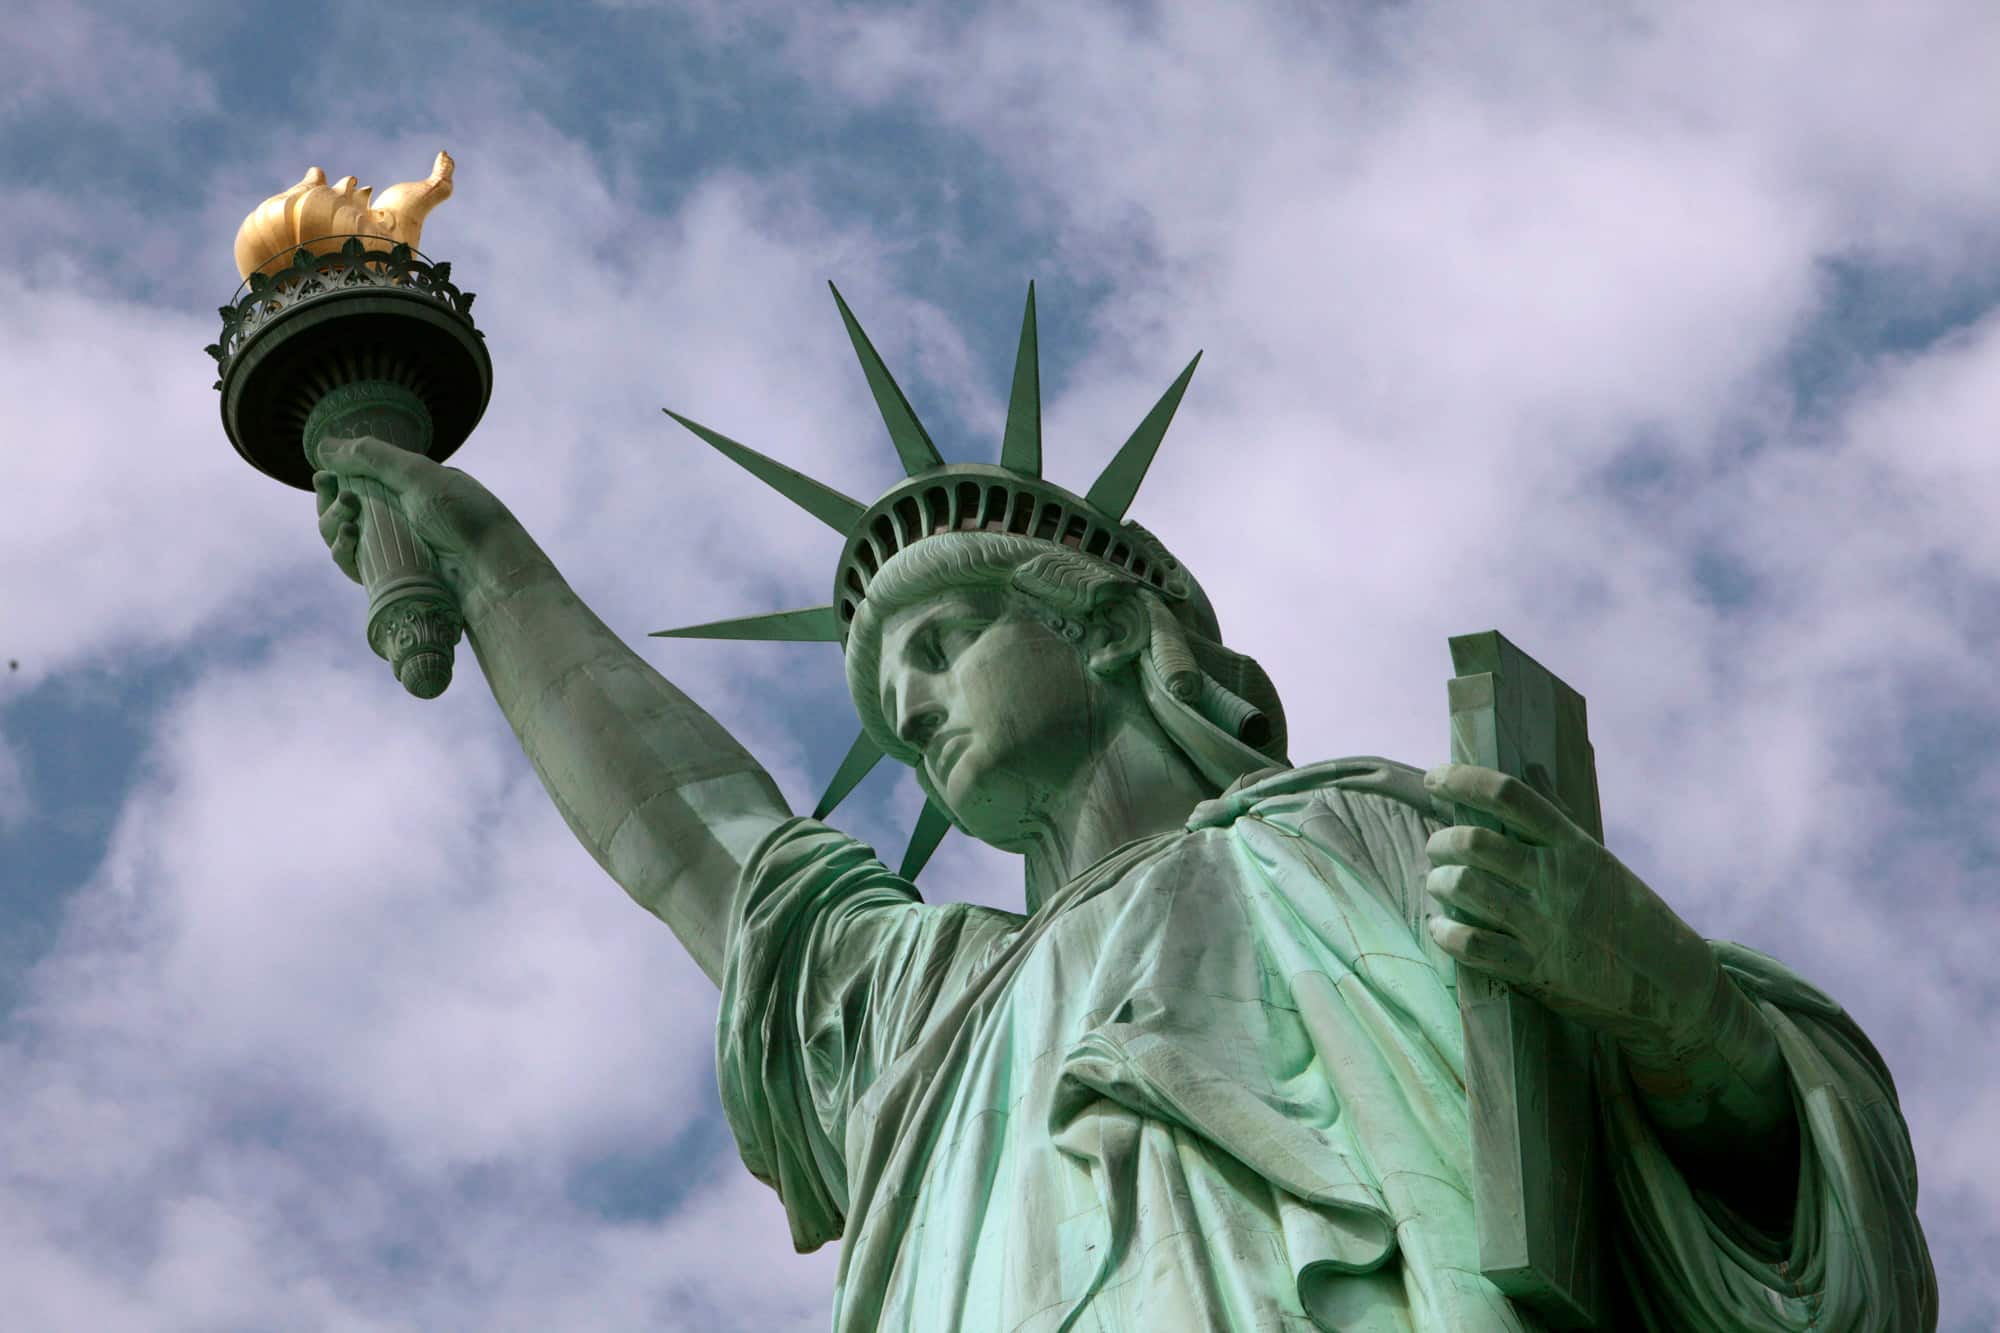 Believe it or not: Statue of Liberty - symbol of freedom - inspired by Arab woman!